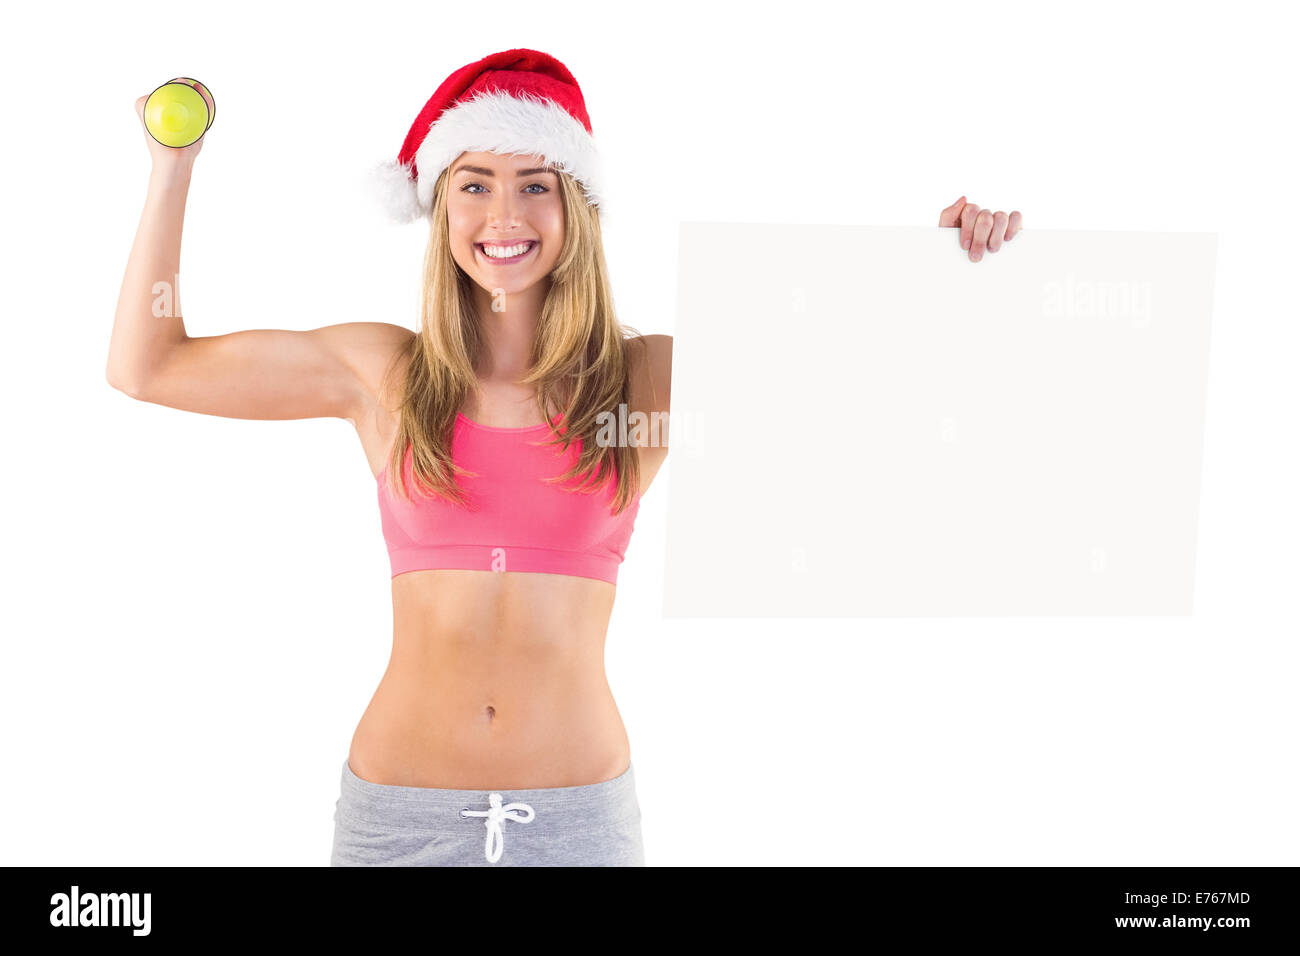 Woman In White Bra Looking On Her Armpit Stock Photo, Picture and Royalty  Free Image. Image 36828402.